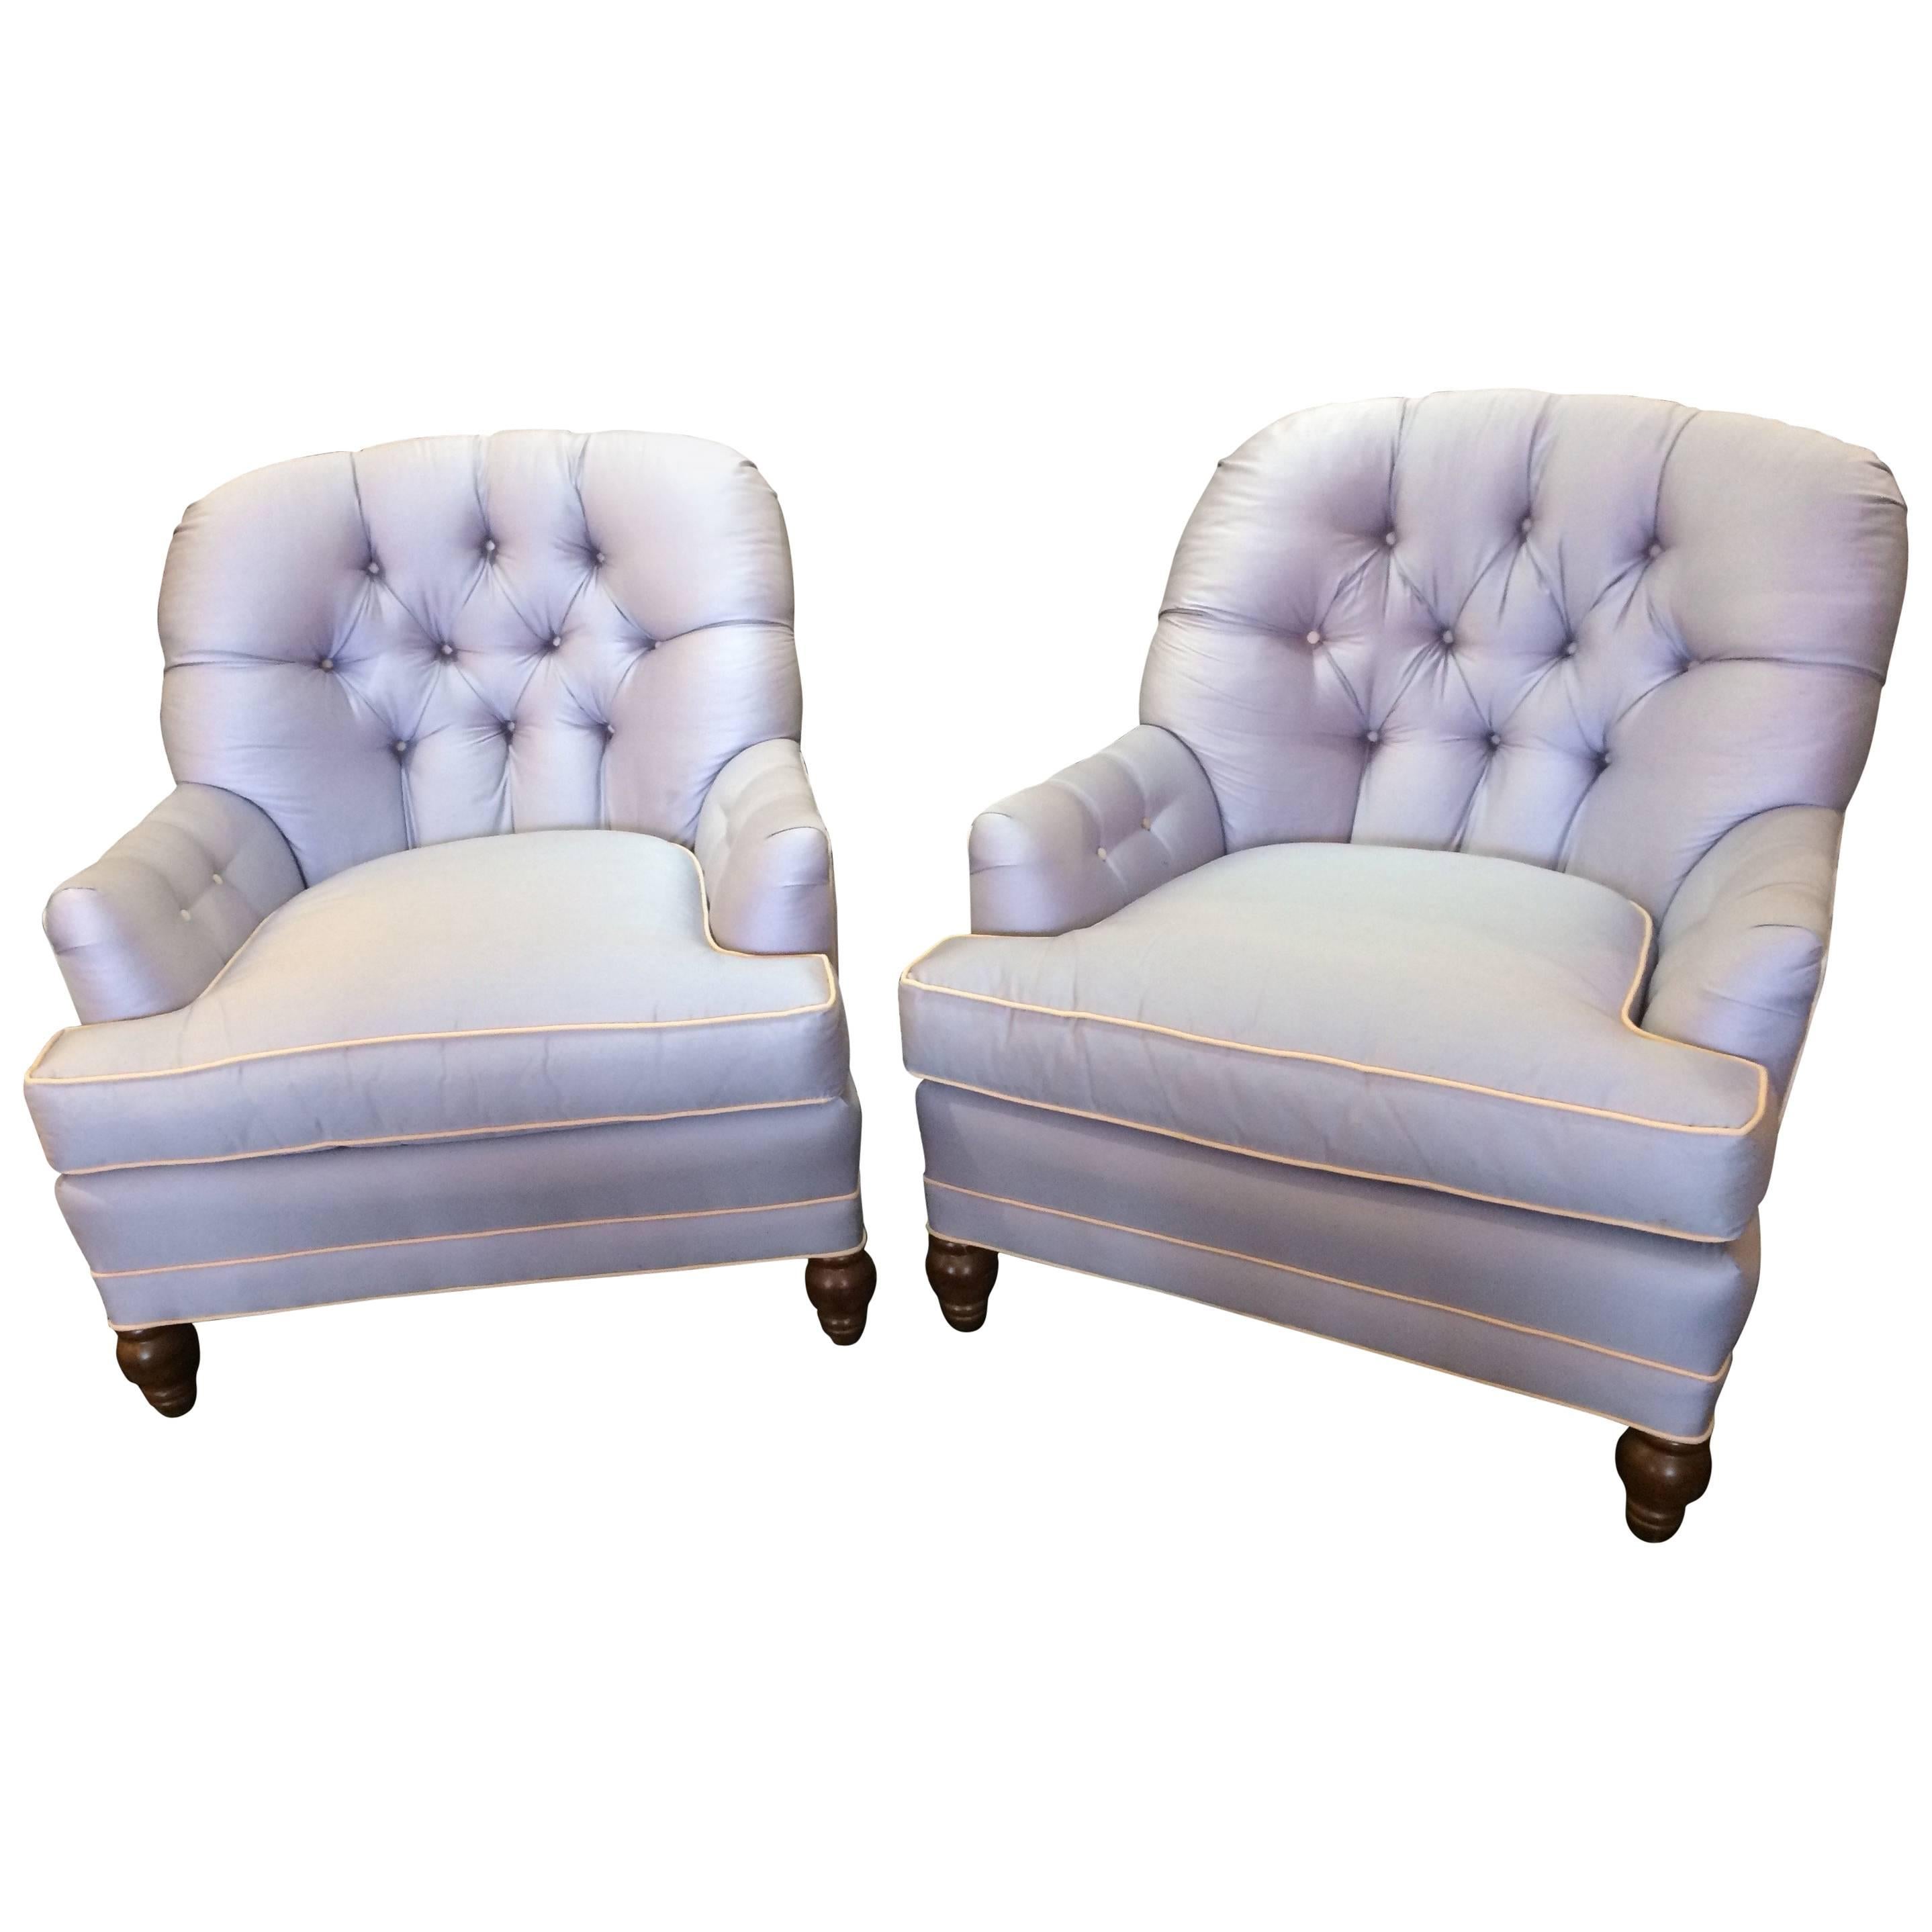 Luxurious Tufted Club Chairs in a Heavenly Light Blue